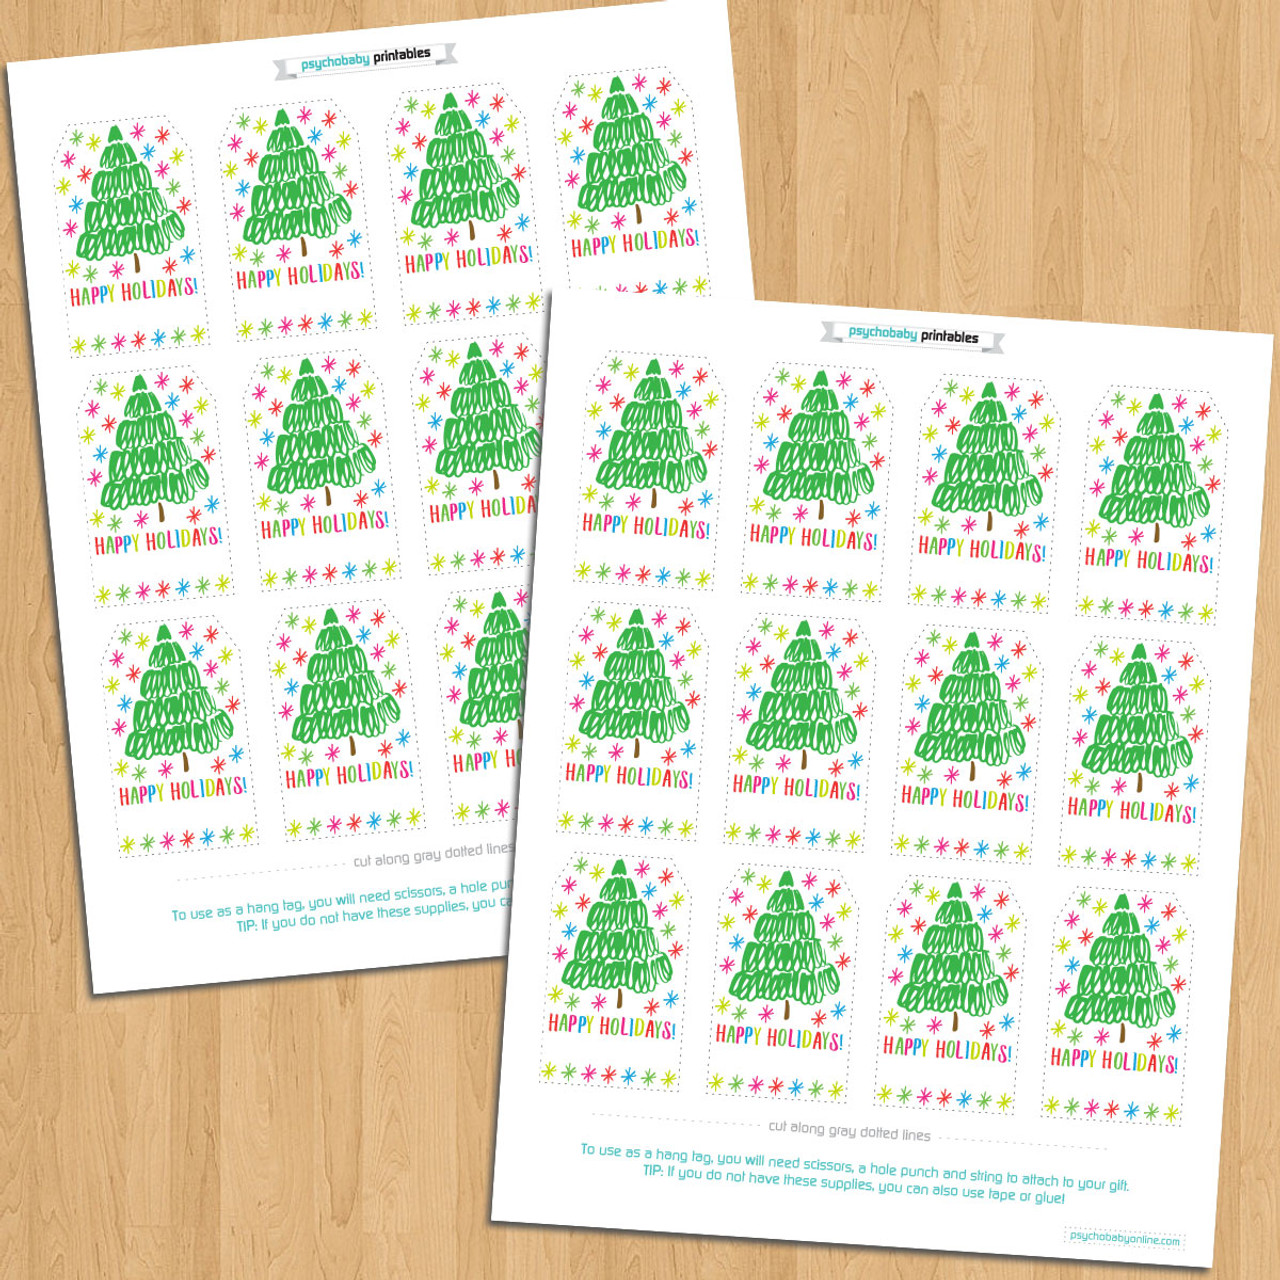 Christmas gift tags for Christmas present gifts and party favors